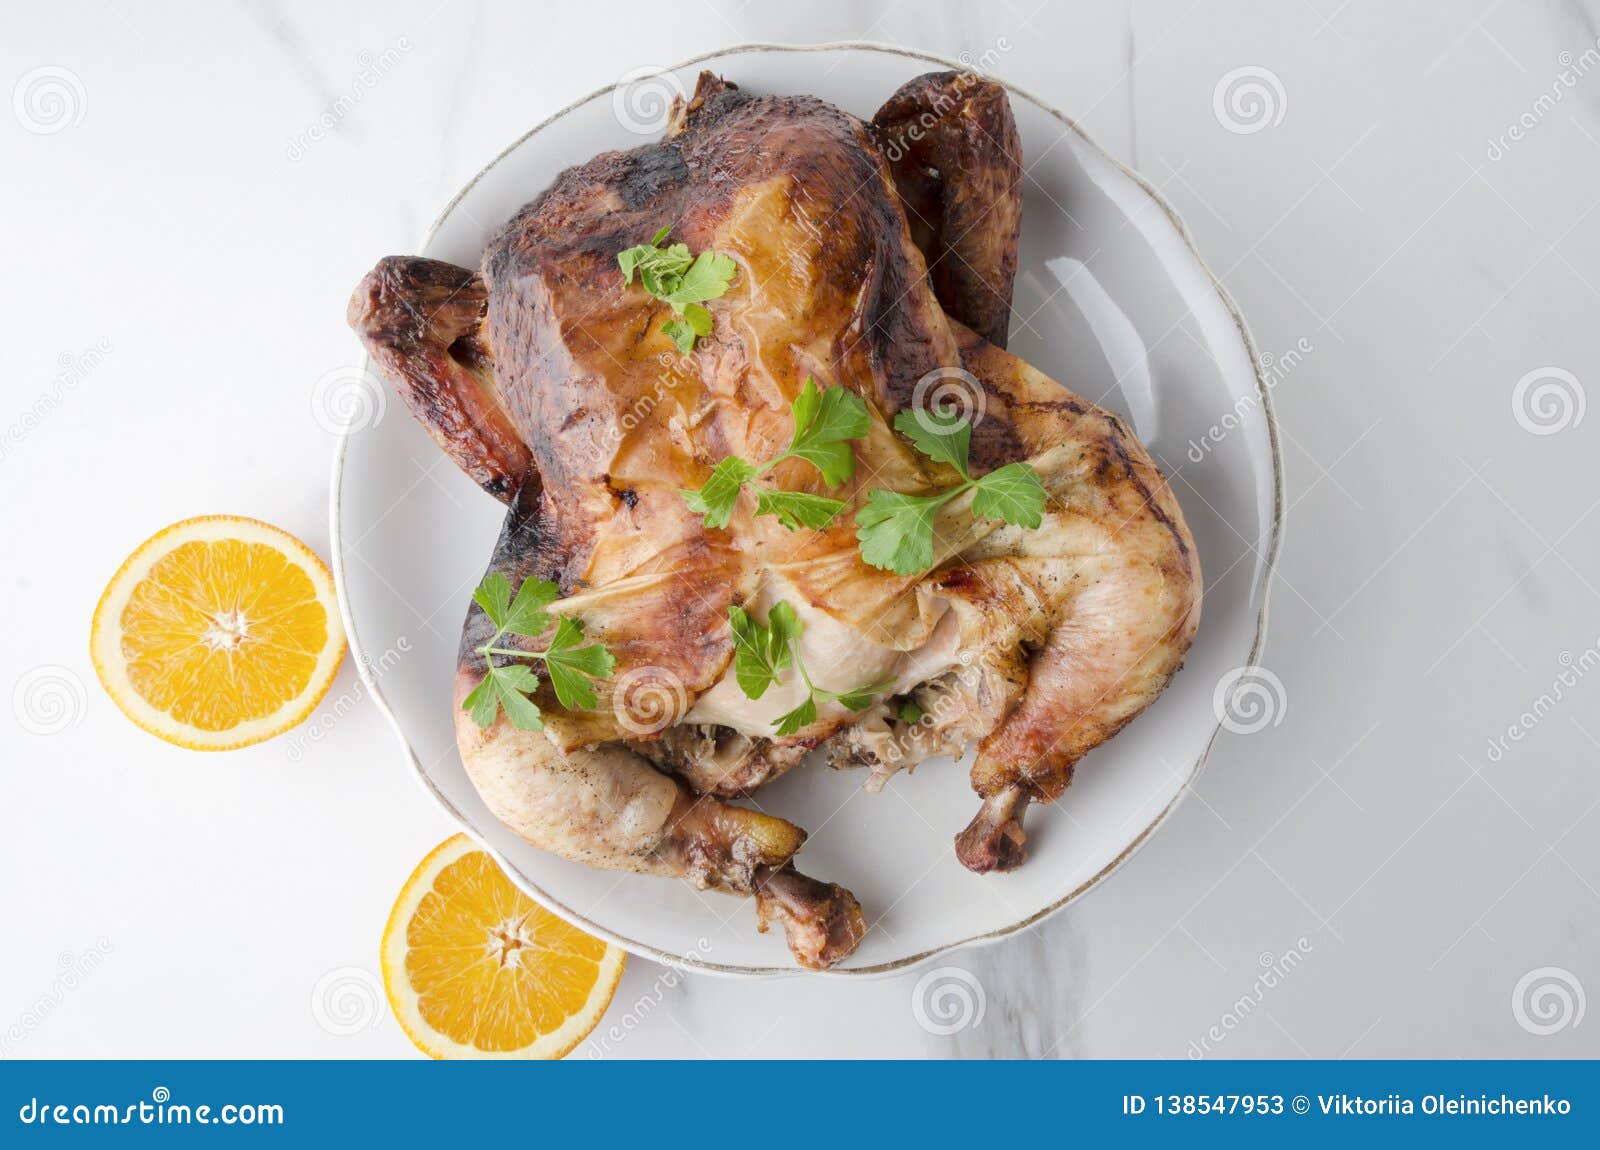 tasty hot roasted chicken with oranges on big plate on wite marble table,top view